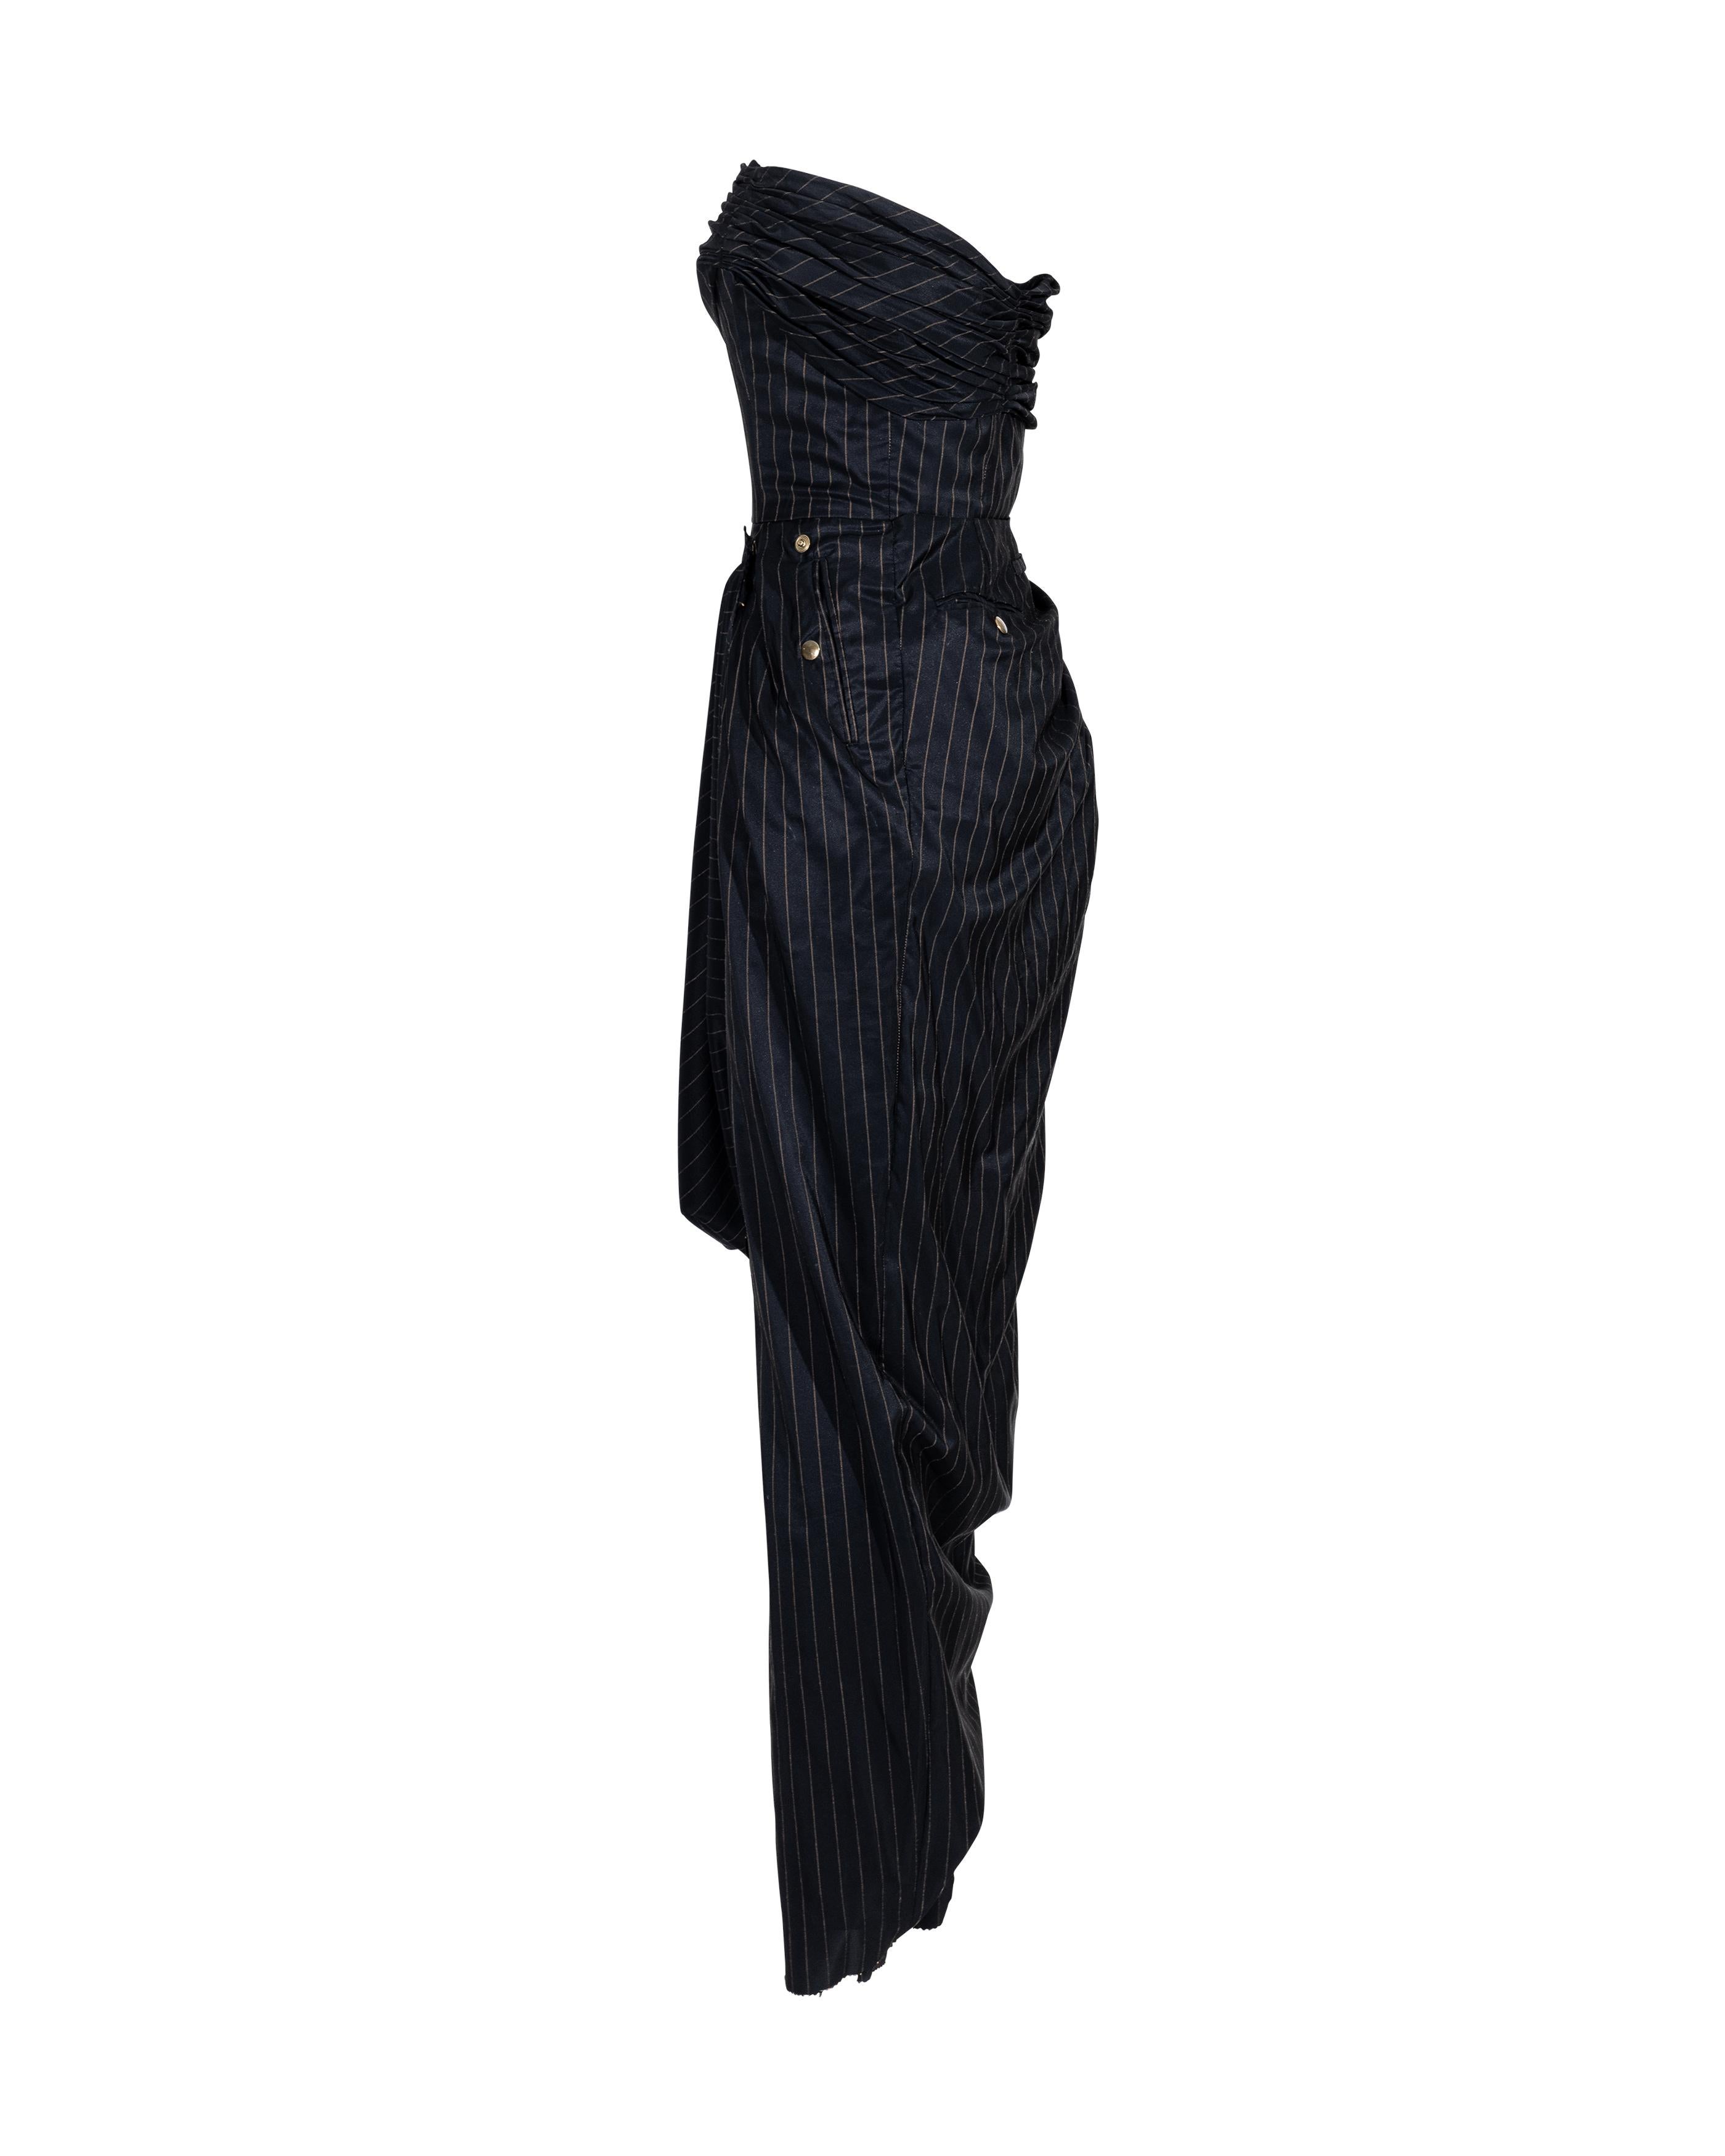 S/S 1995 Jean Paul Gaultier Pinstripe Strapless Bustle Gown In Good Condition In North Hollywood, CA